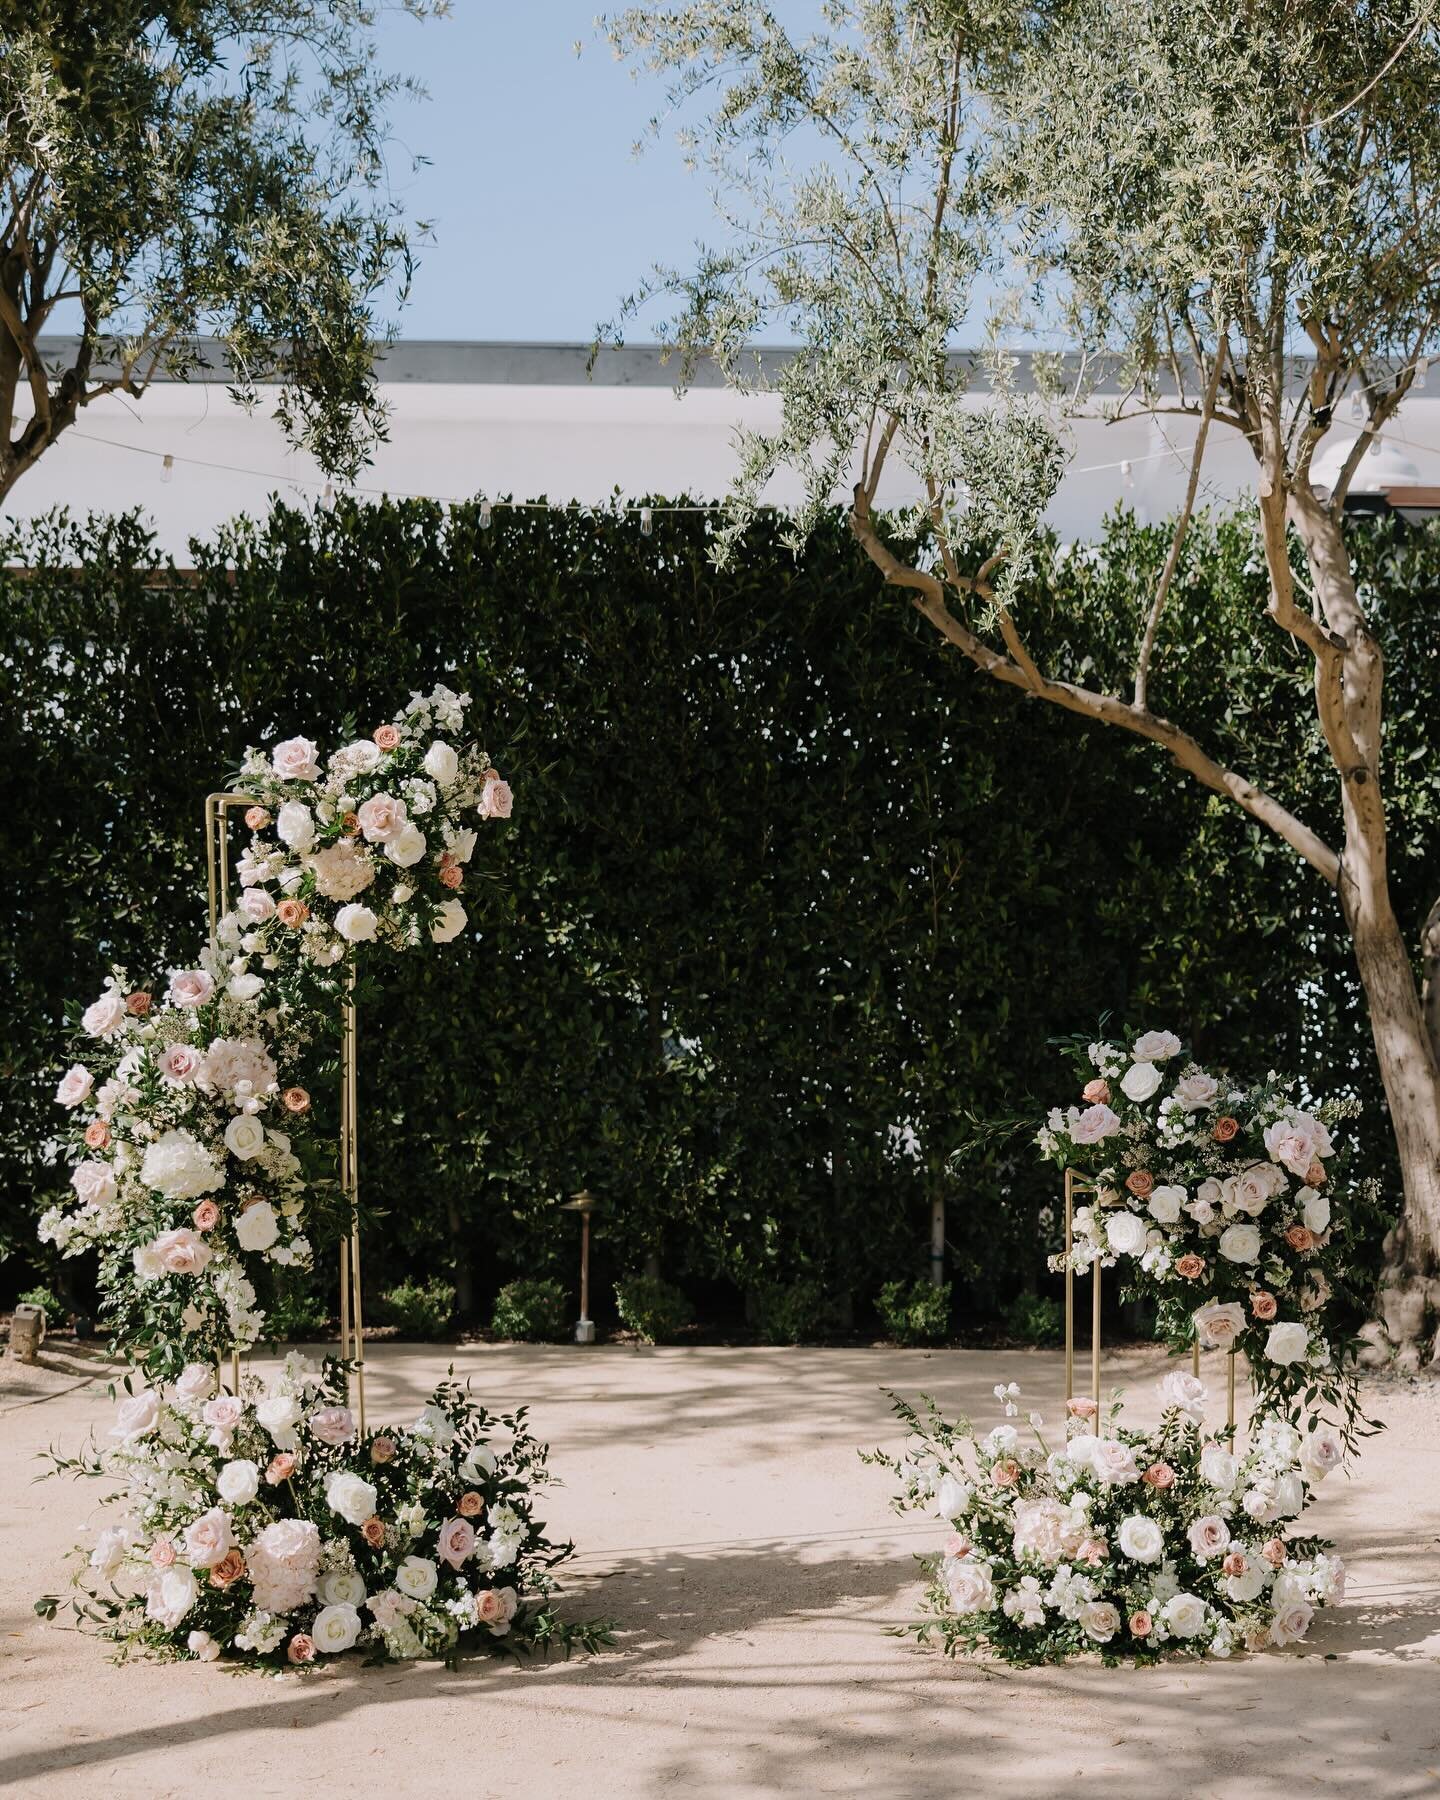 Our most visited venue last year was @grandgimeno 💙 which is great since we love our @jayscatering family~ 

Here are some of the ceremony installations and reception florals we created there! Swipe to the end to see a video of the huge flower bridg